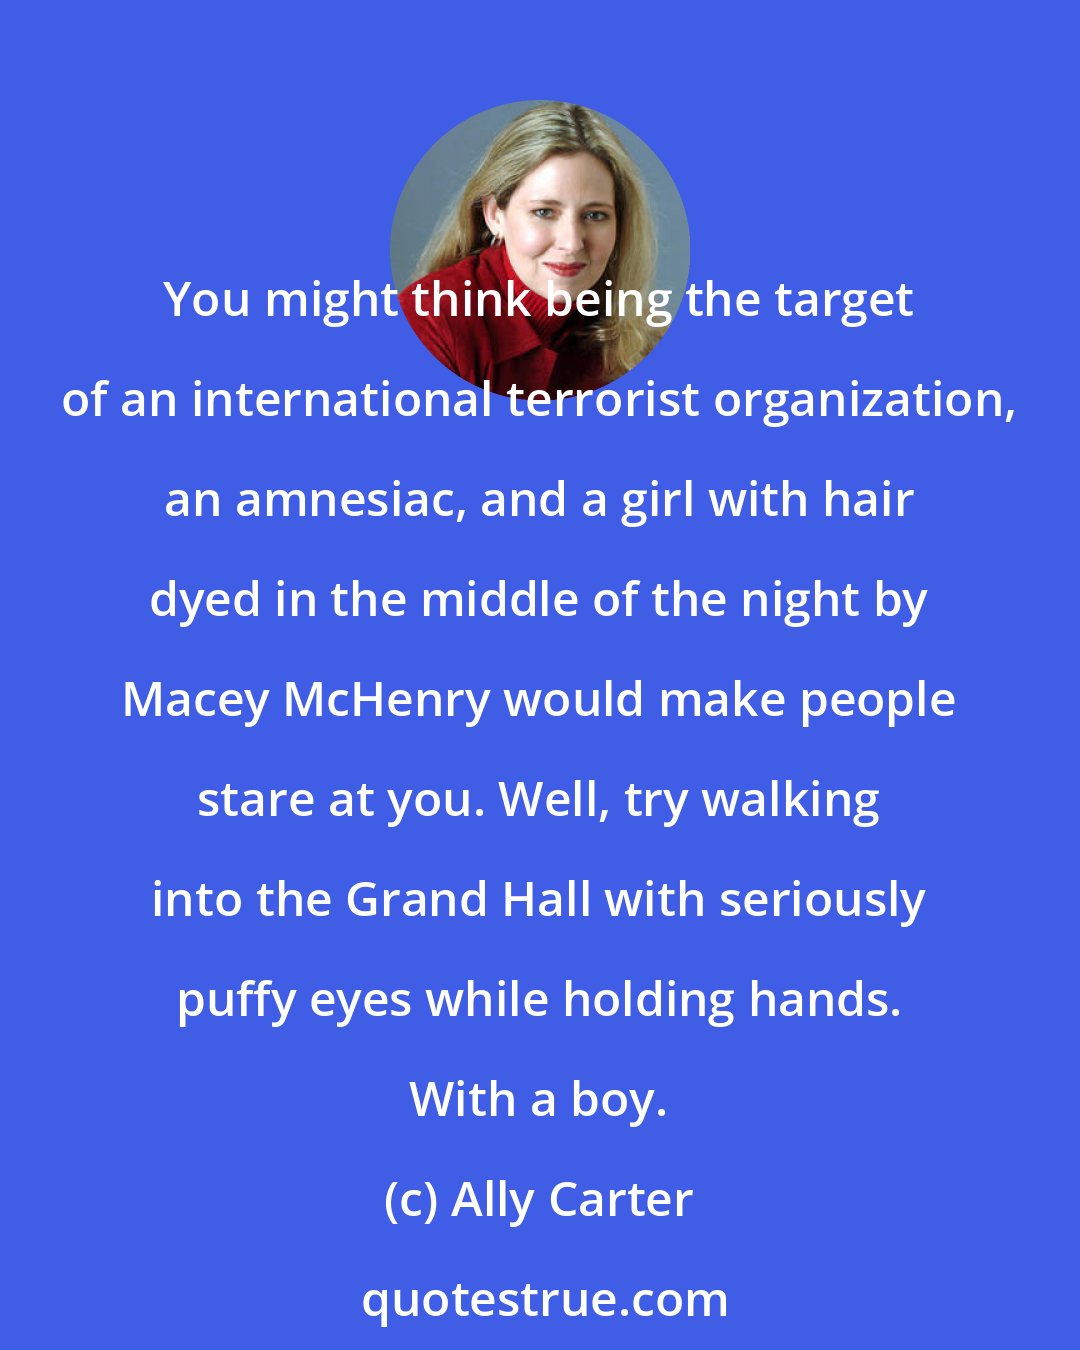 Ally Carter: You might think being the target of an international terrorist organization, an amnesiac, and a girl with hair dyed in the middle of the night by Macey McHenry would make people stare at you. Well, try walking into the Grand Hall with seriously puffy eyes while holding hands. With a boy.